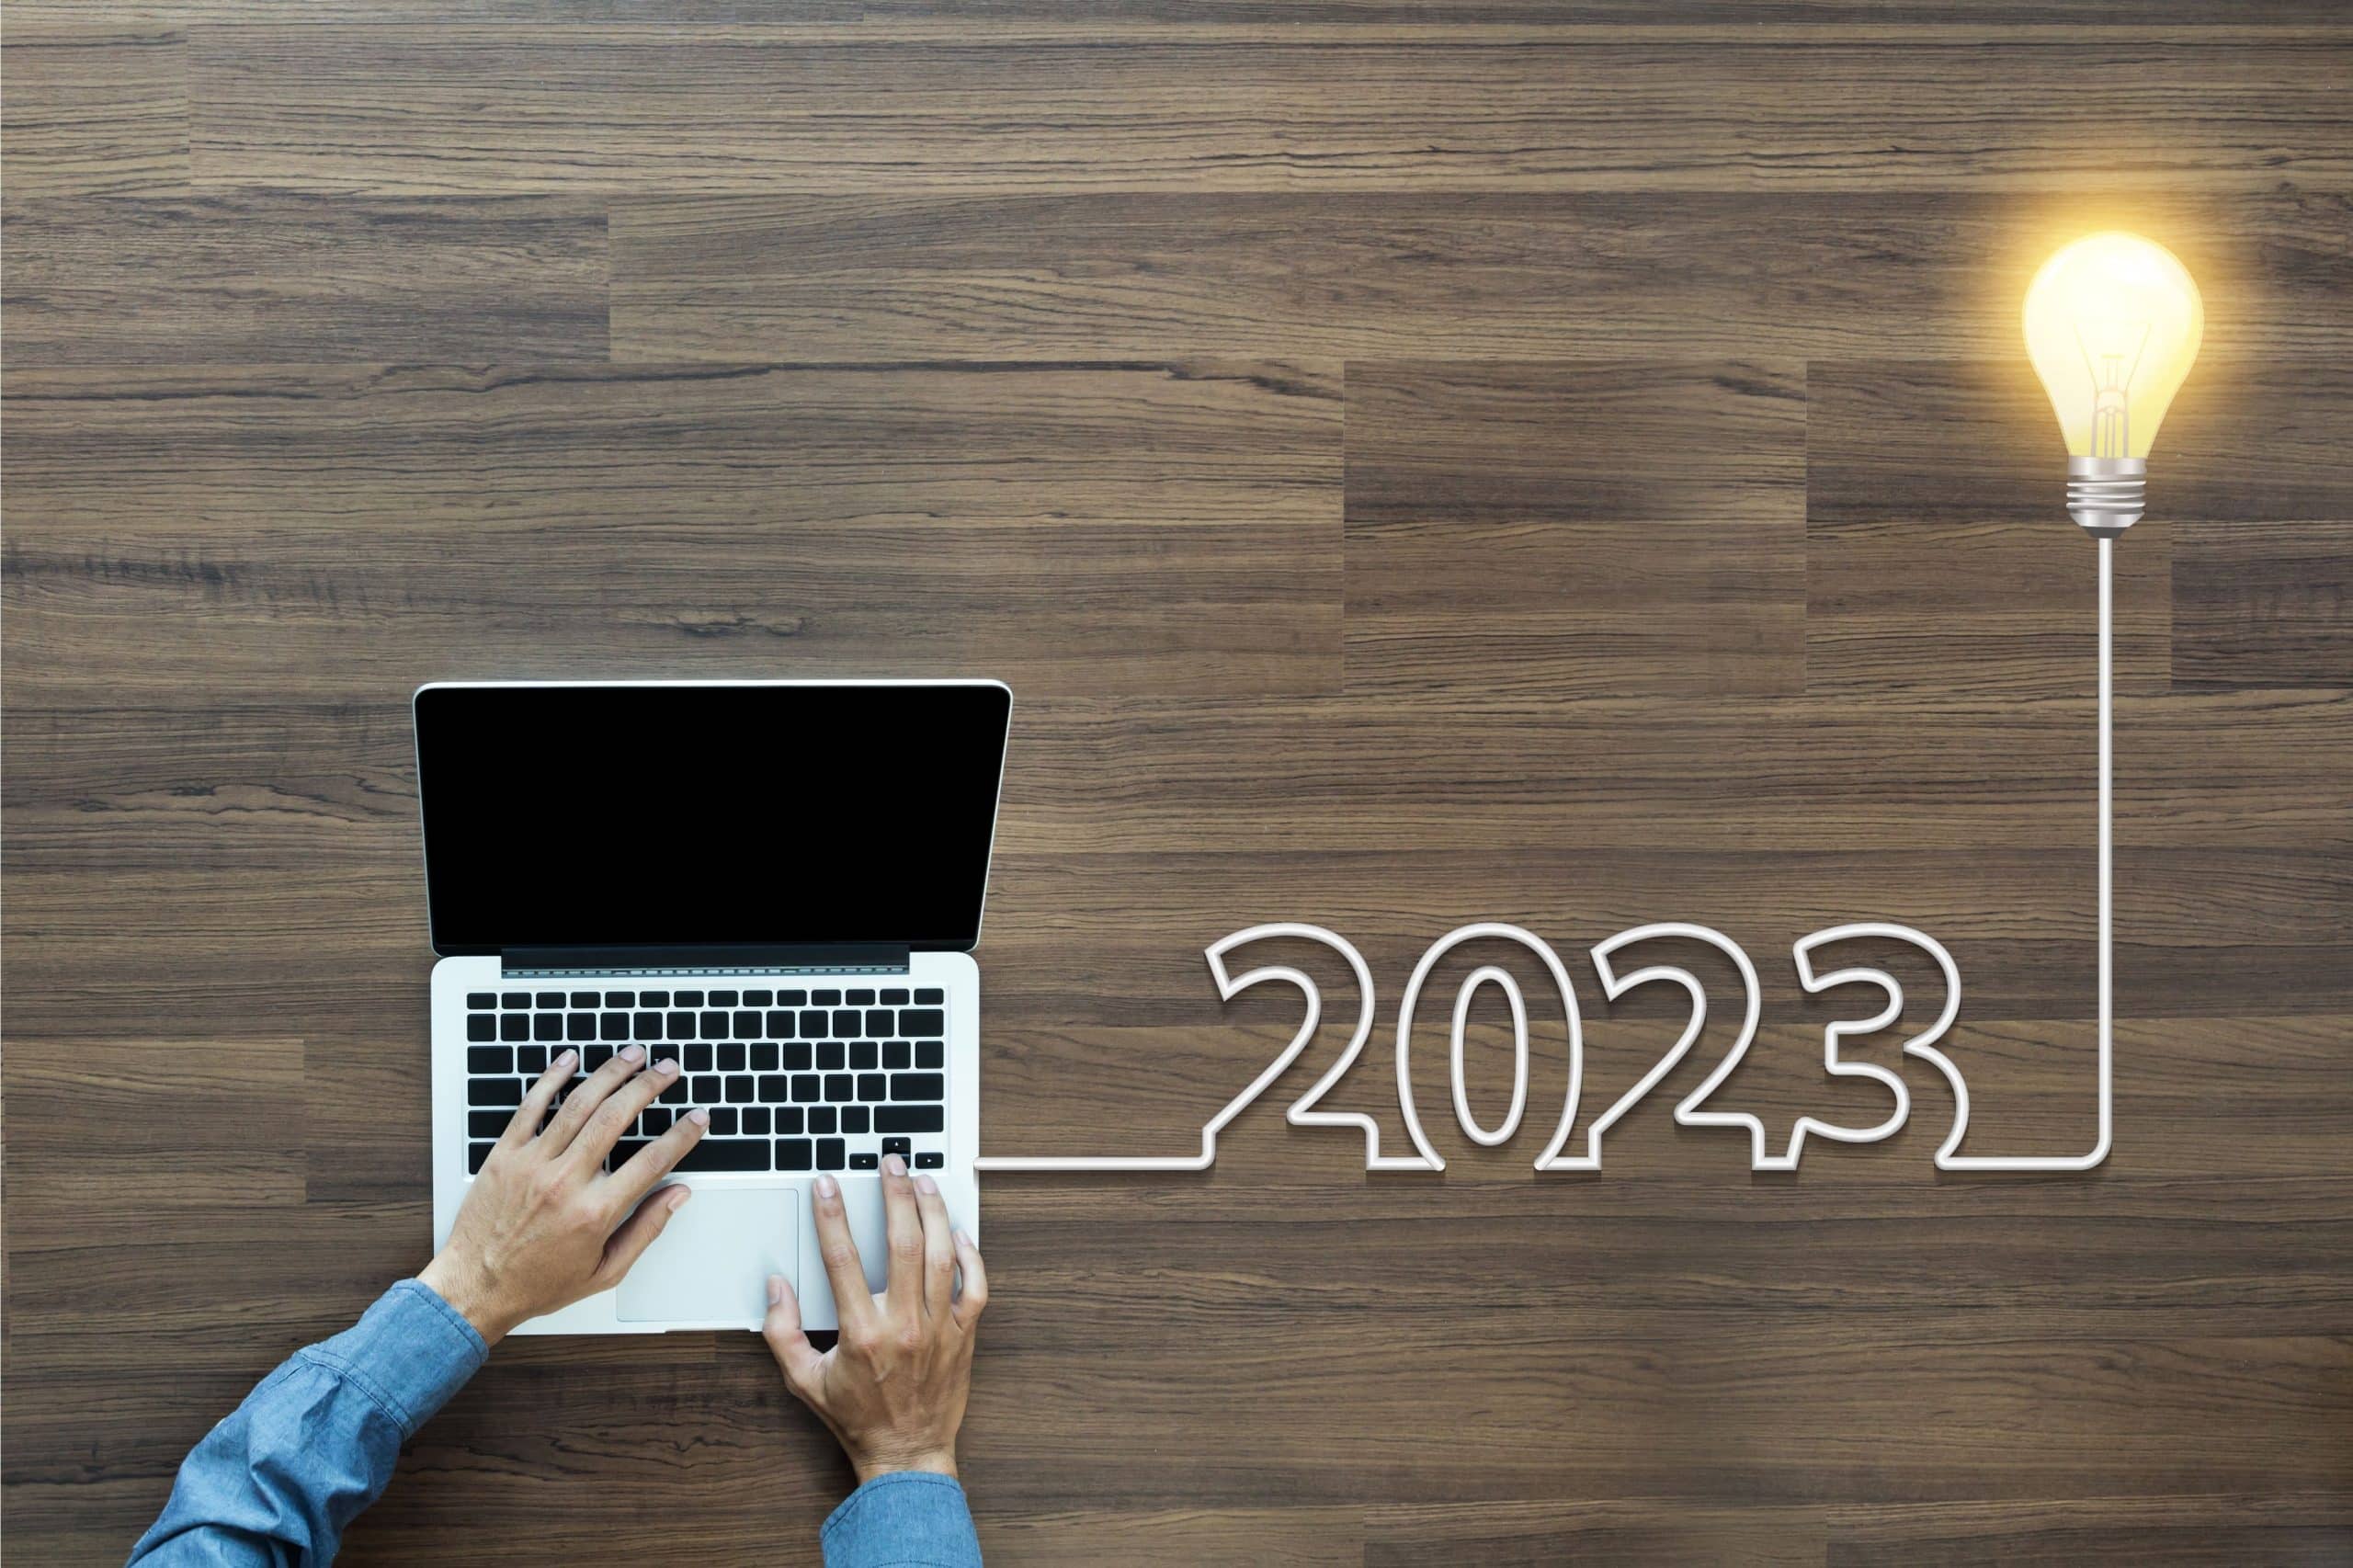 The Future of Social Media: 9 Trends & Predictions for 2023 and Beyond